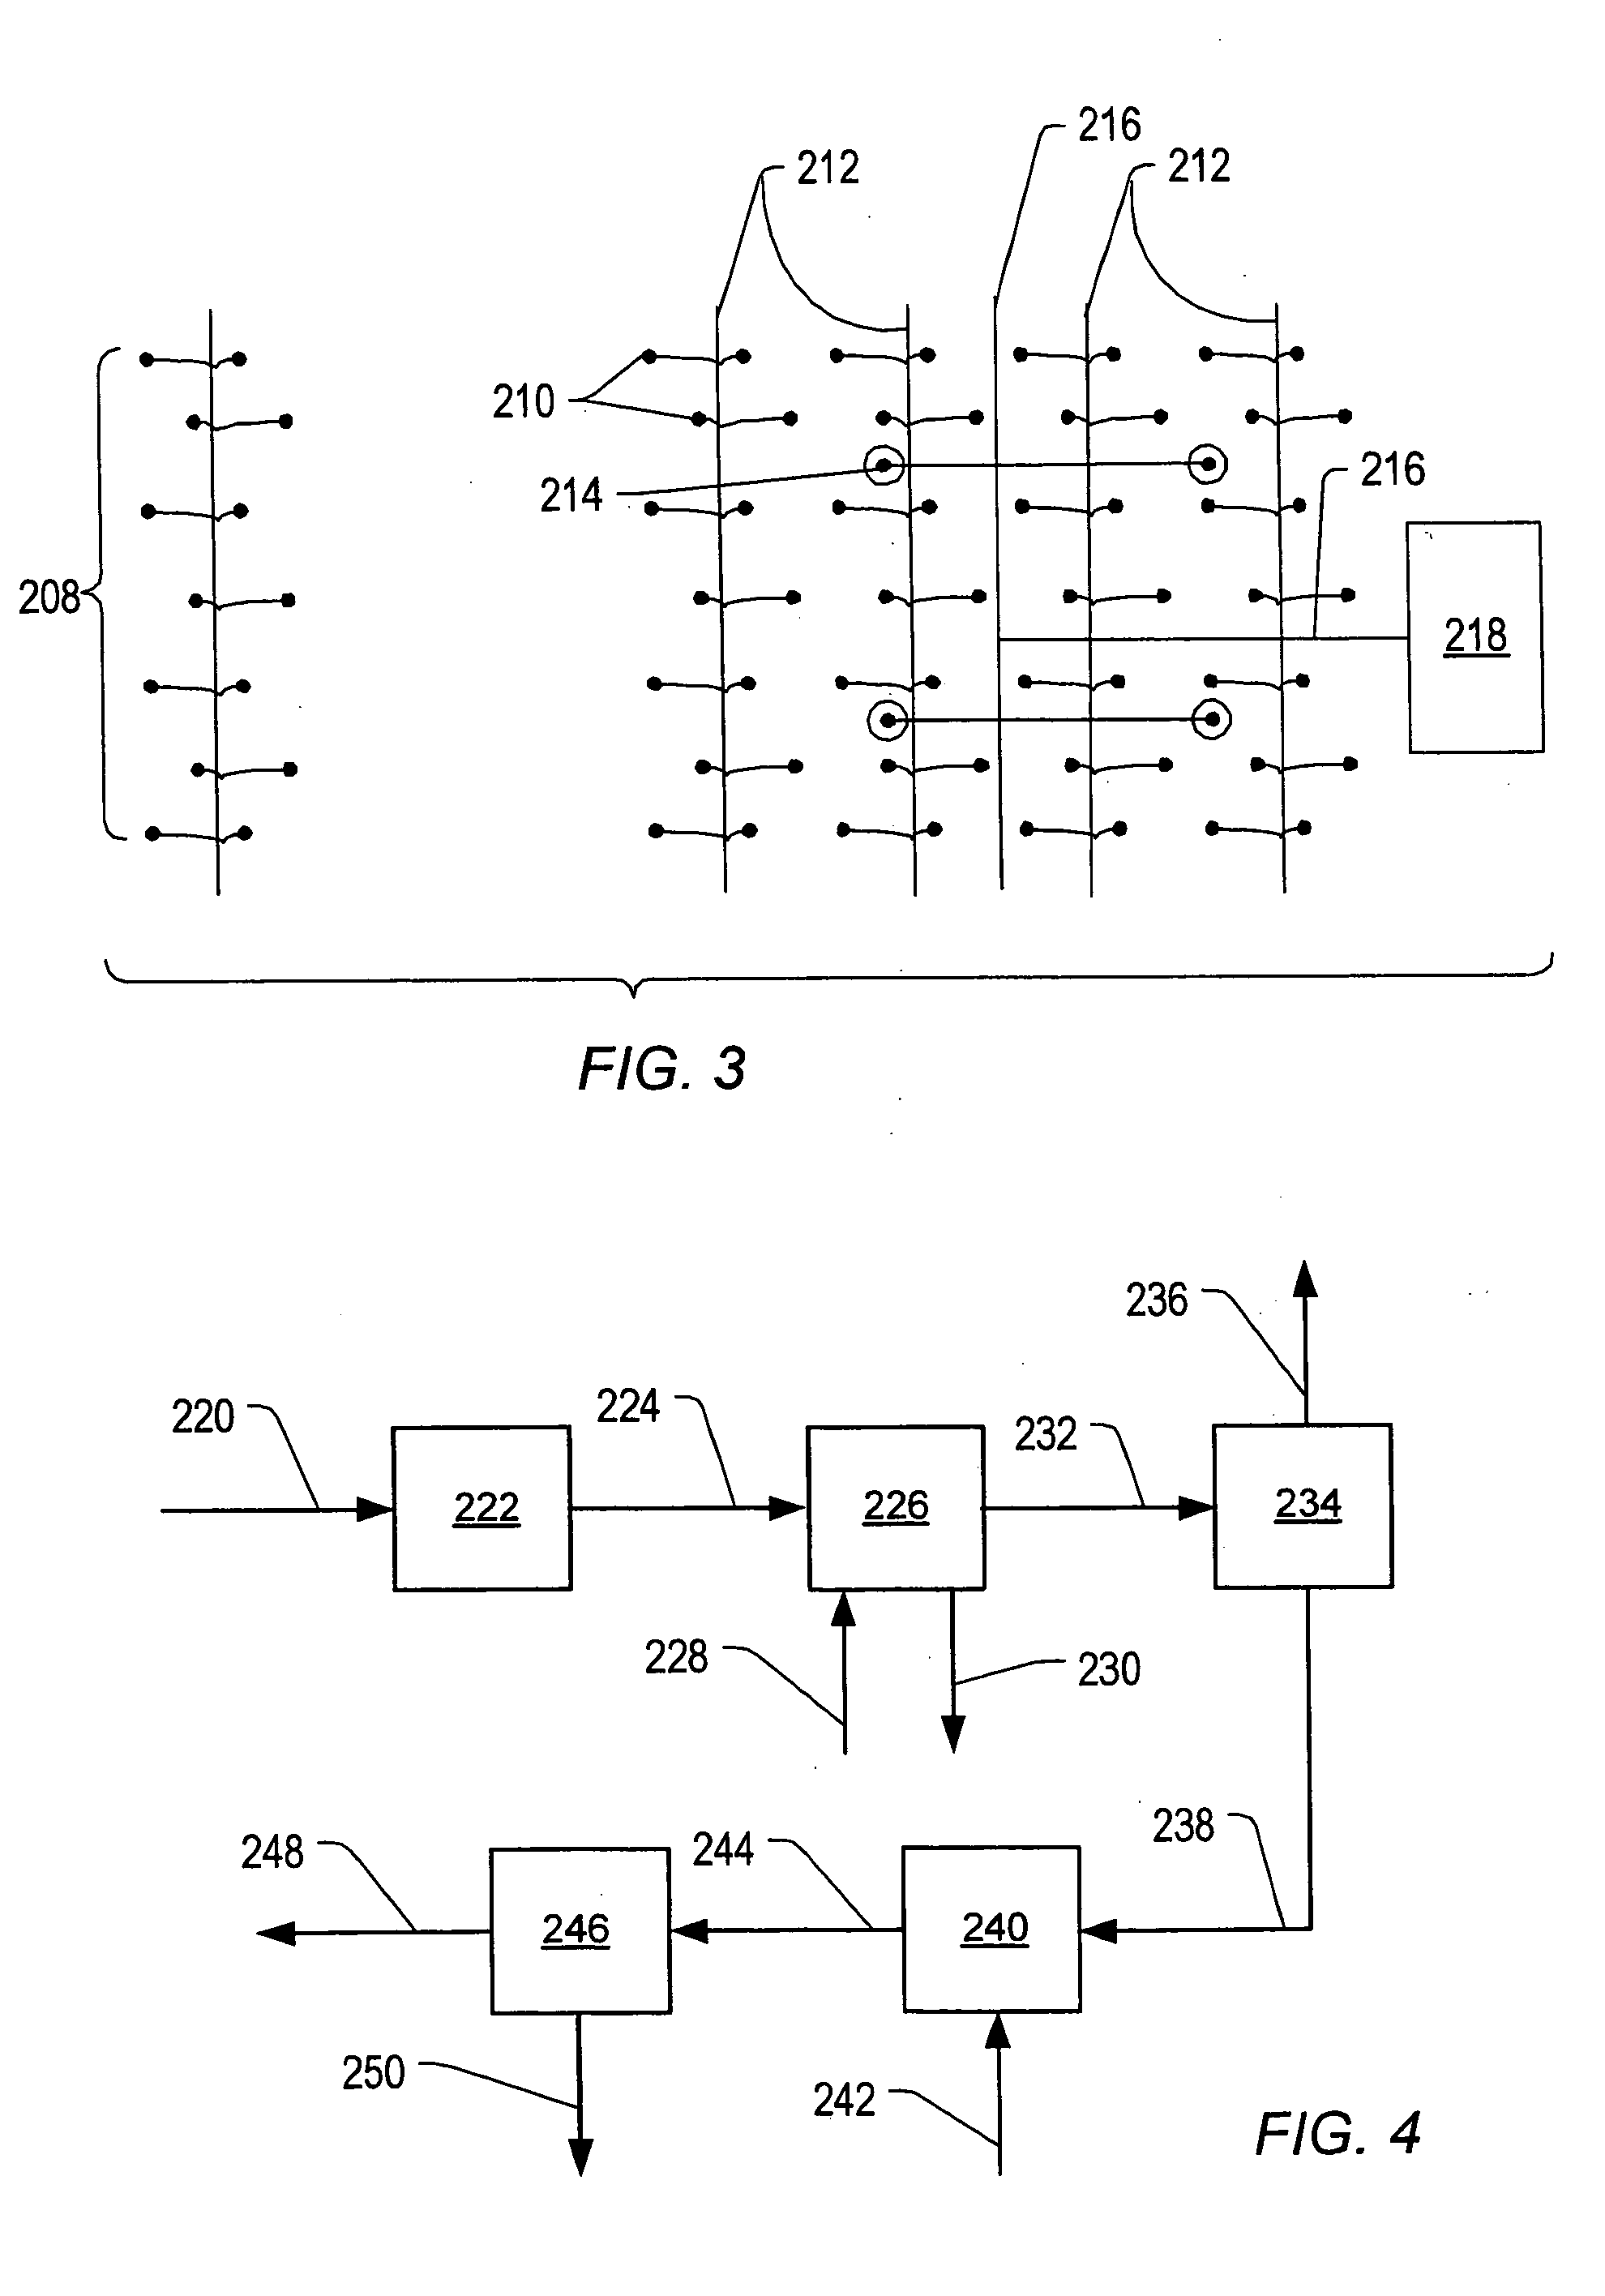 Temperature limited heaters with relatively constant current